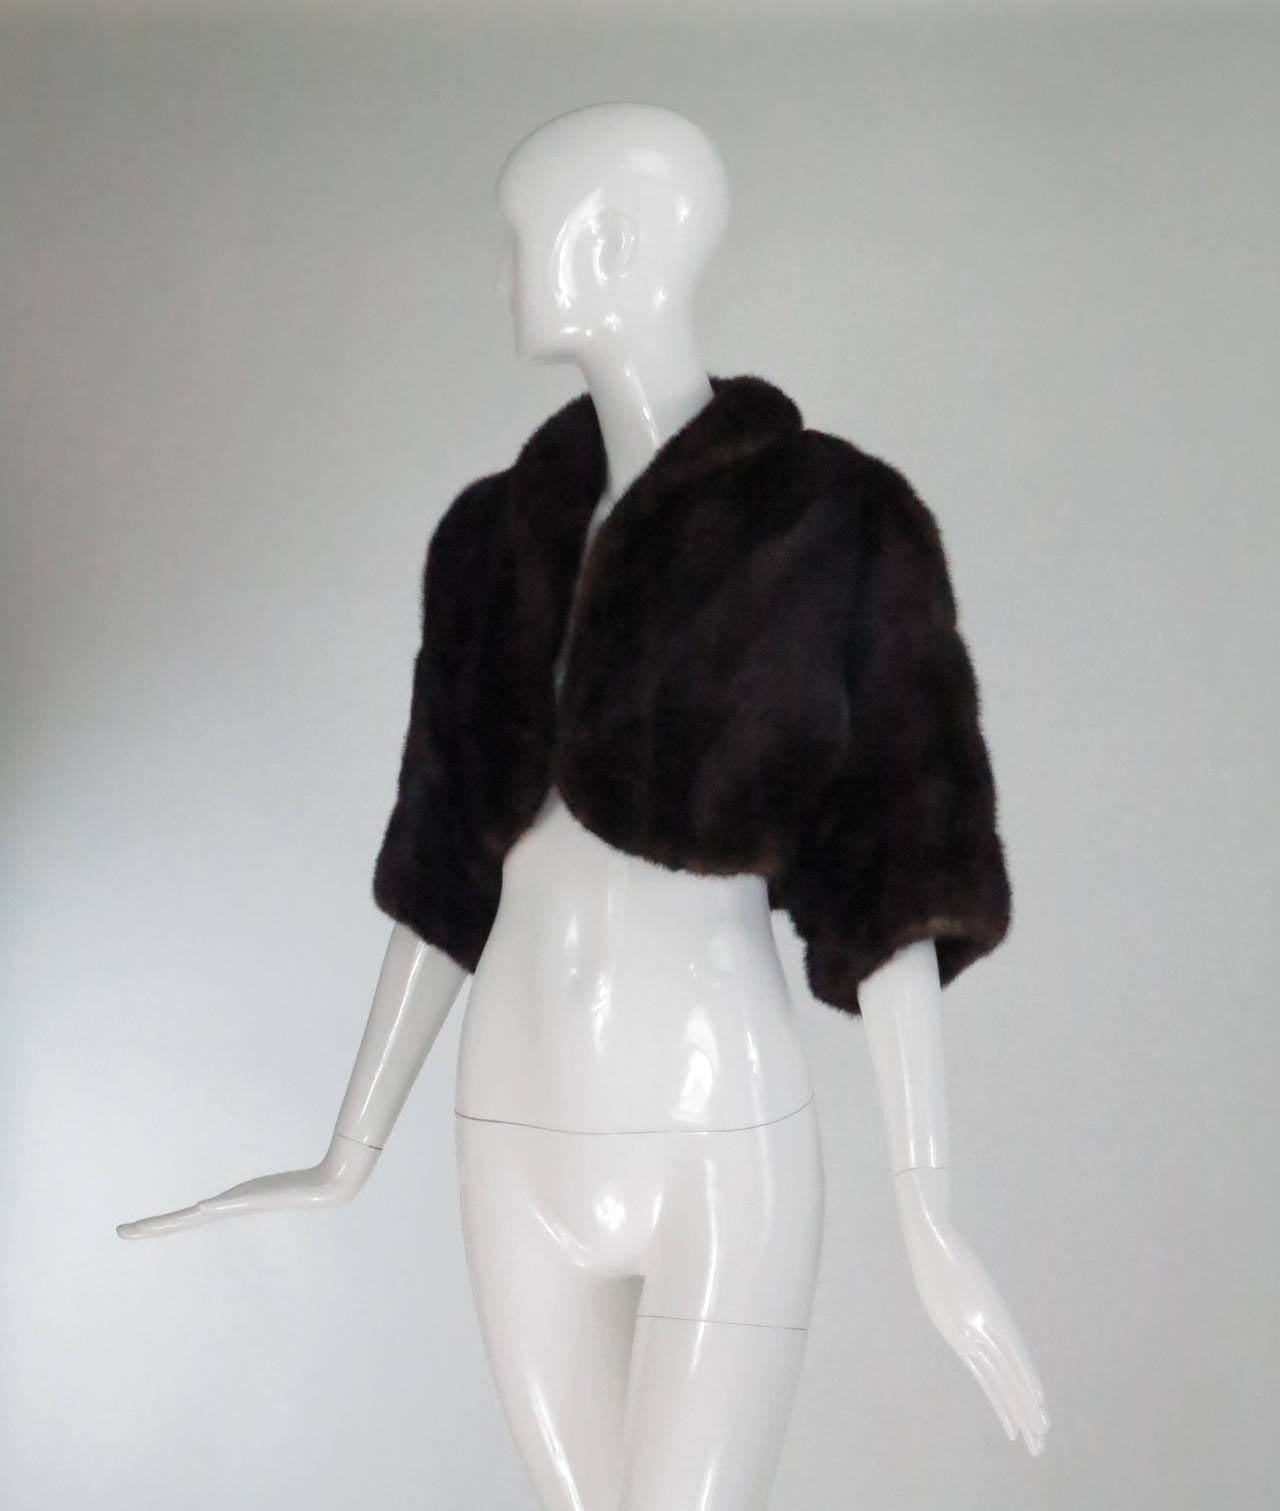 Elegant rich dark mink fur evening jacket, perfect for a special event or wedding...Short cropped style has a shawl collar, 3/4 length sleeves and closes at the front with a single fur hook...Lined in dark chocolate brown brocade...Fits like a